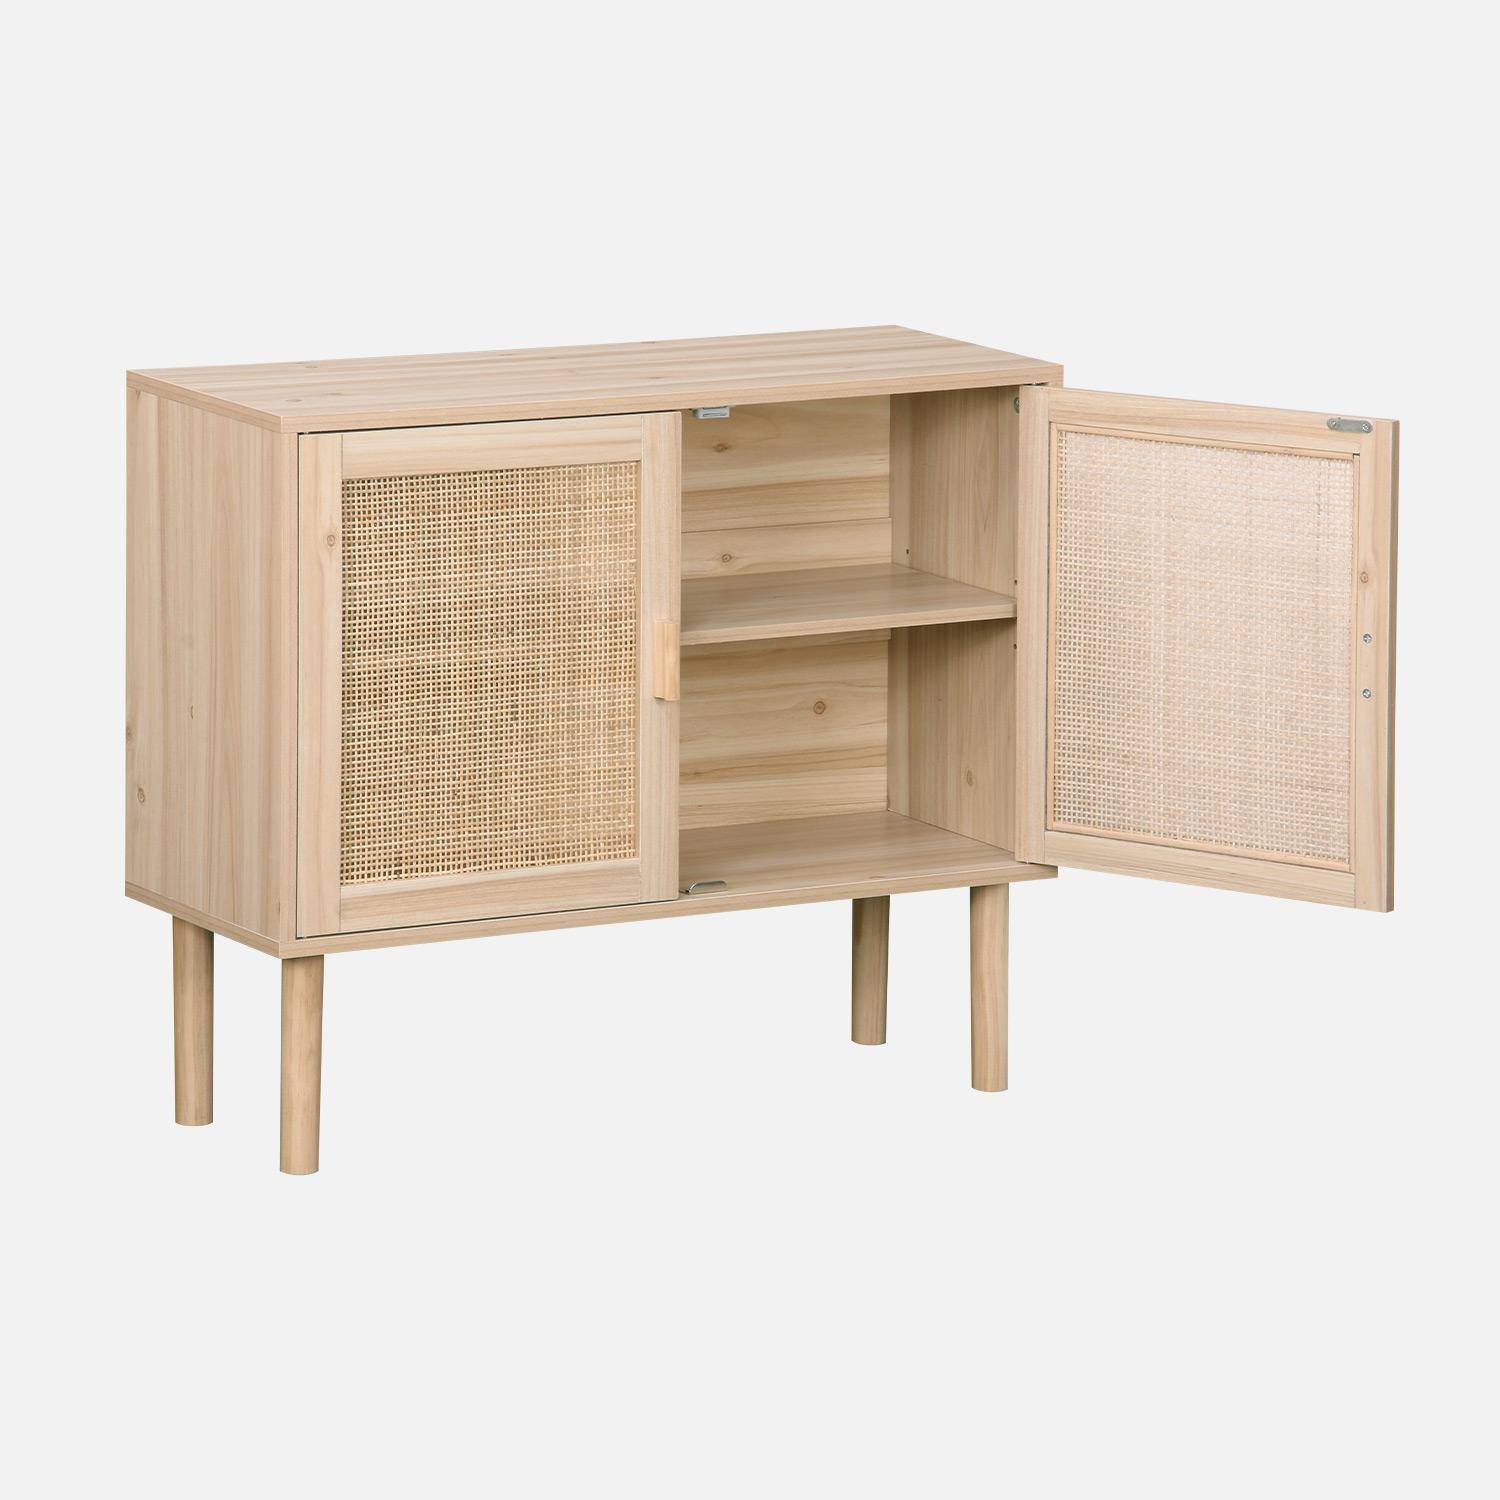 Wood and woven rattan 2-door storage cabinet with shelves, 80x30x68cm, Camargue, Natural,sweeek,Photo5